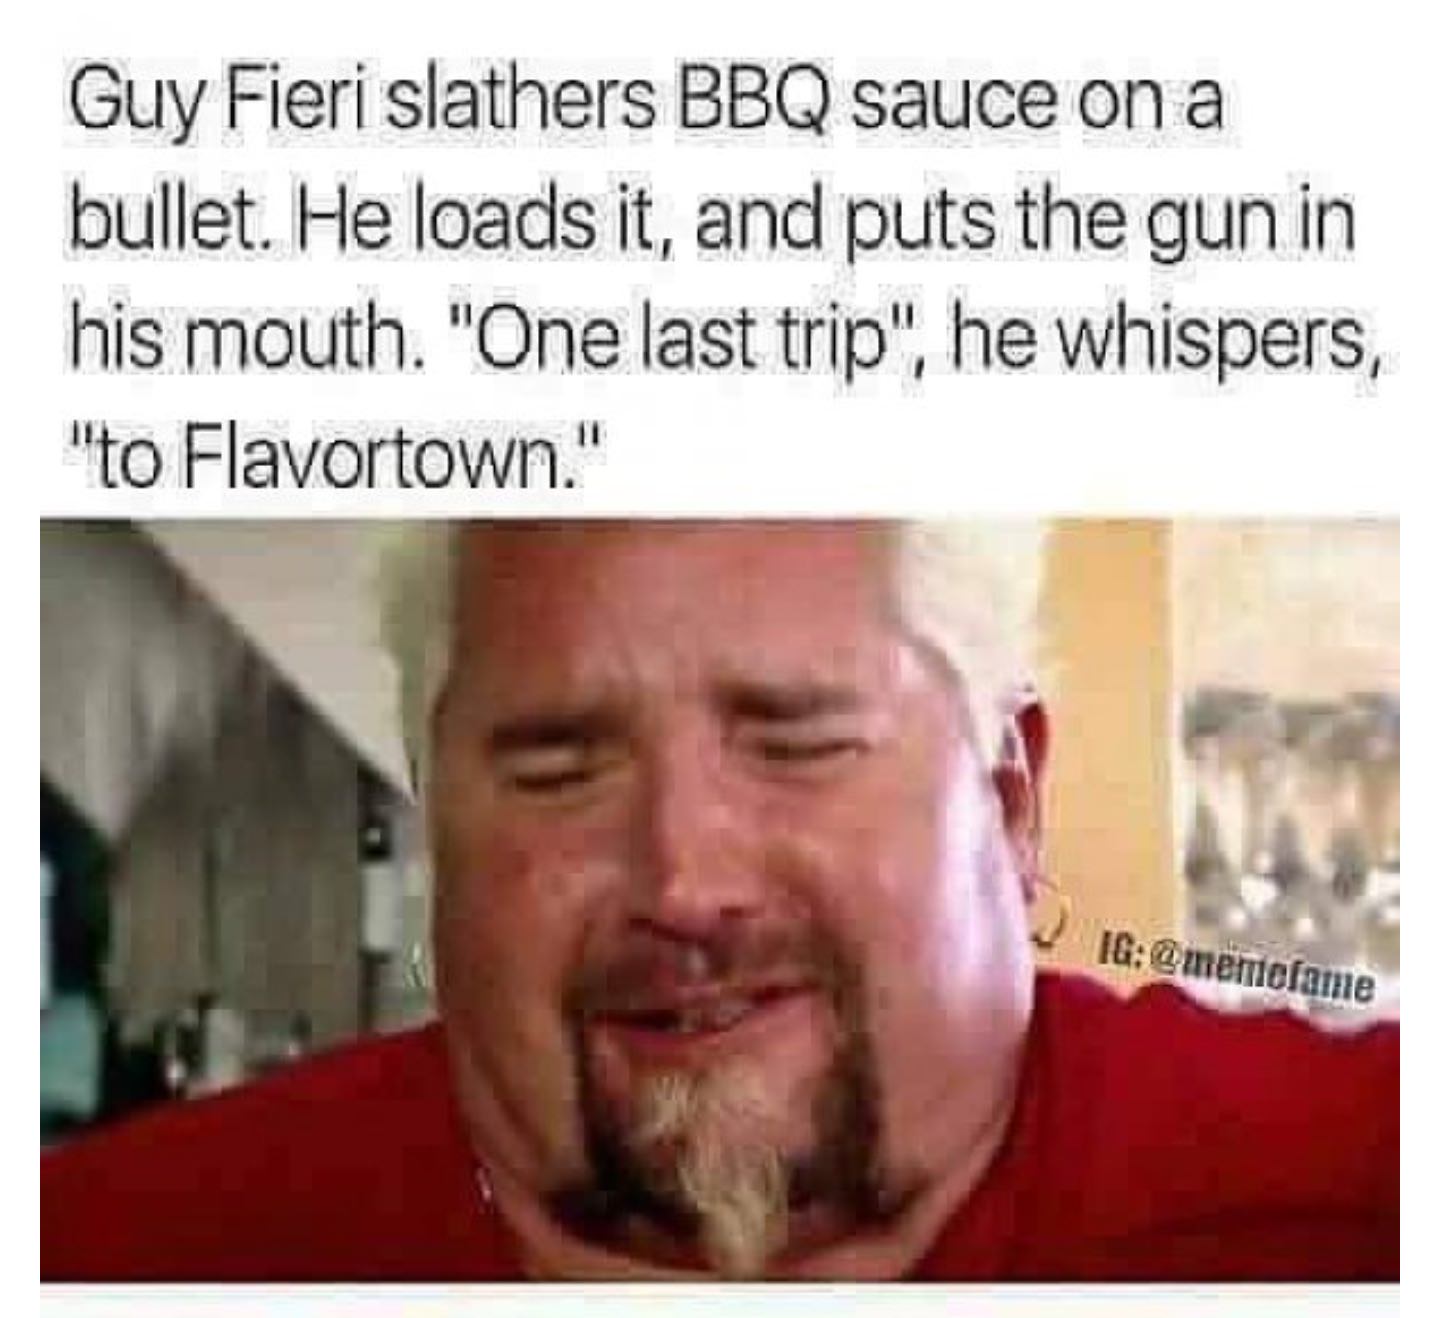 sad guy fieri meme - Guy Fieri slathers Bbq sauce on a bullet. He loads it, and puts the gun in his mouth. "One last trip", he whispers, "to Flavortown." Ig